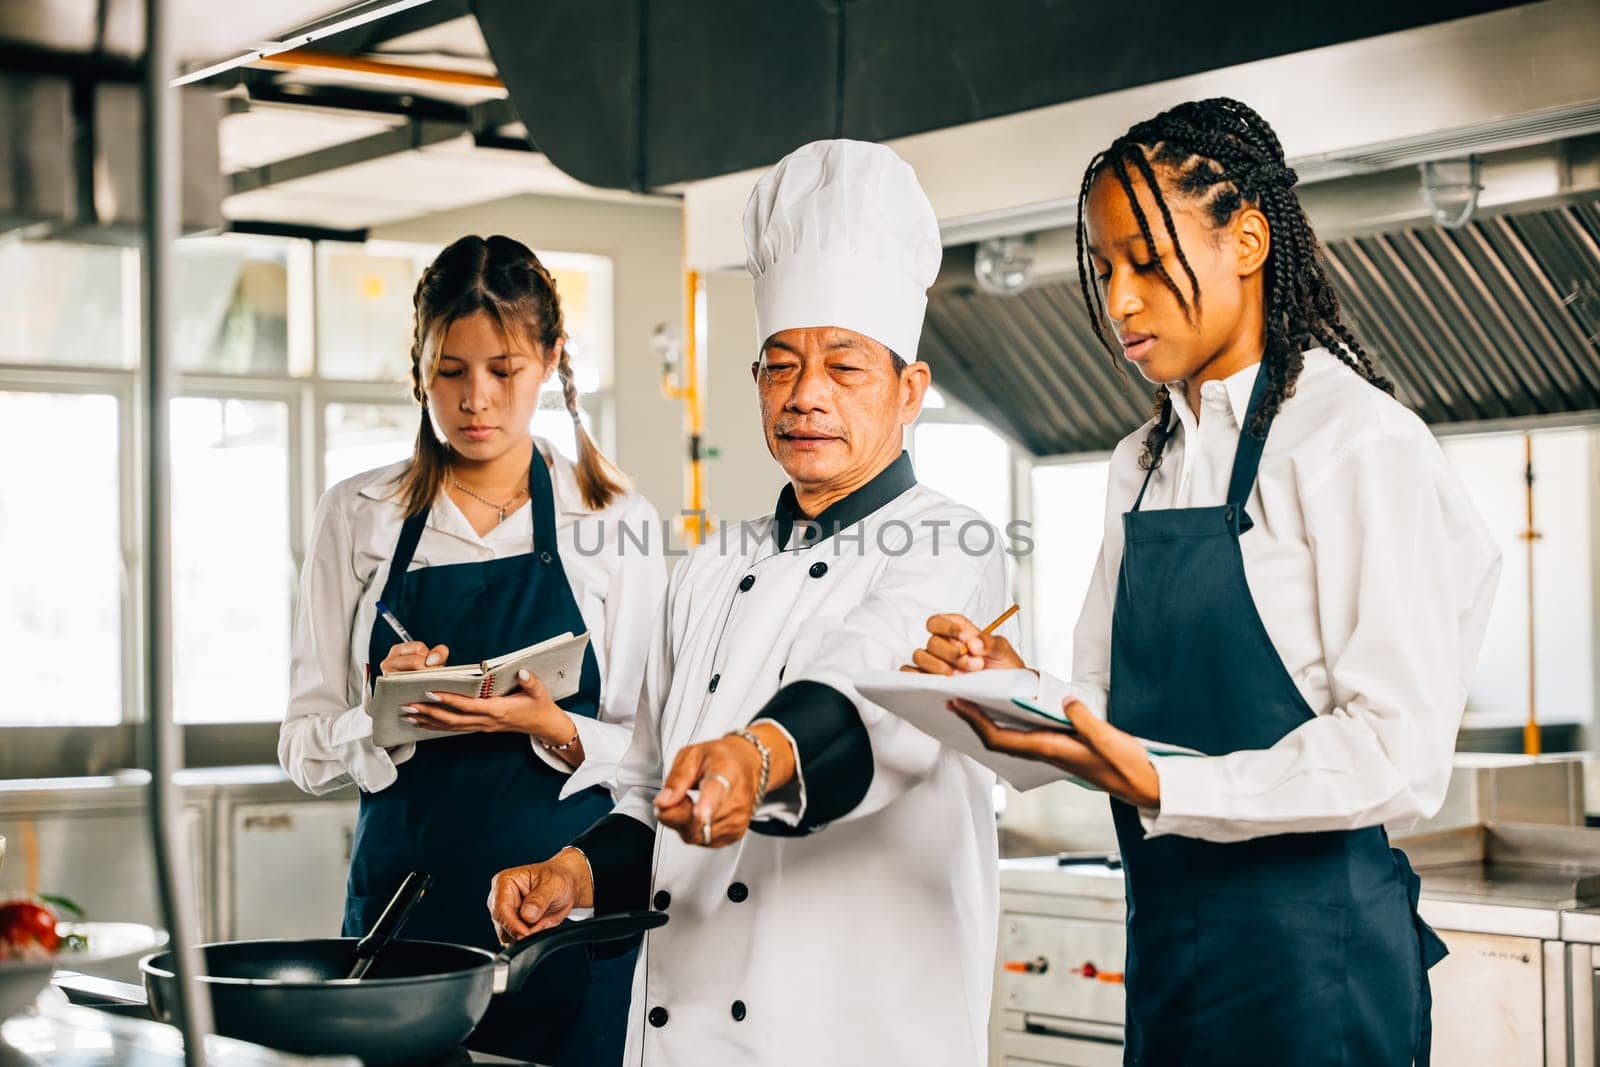 Senior Asian chef educates diverse students in a restaurant kitchen. Stressing teamwork learning and note-taking in this professional educational setting. Food Edocation